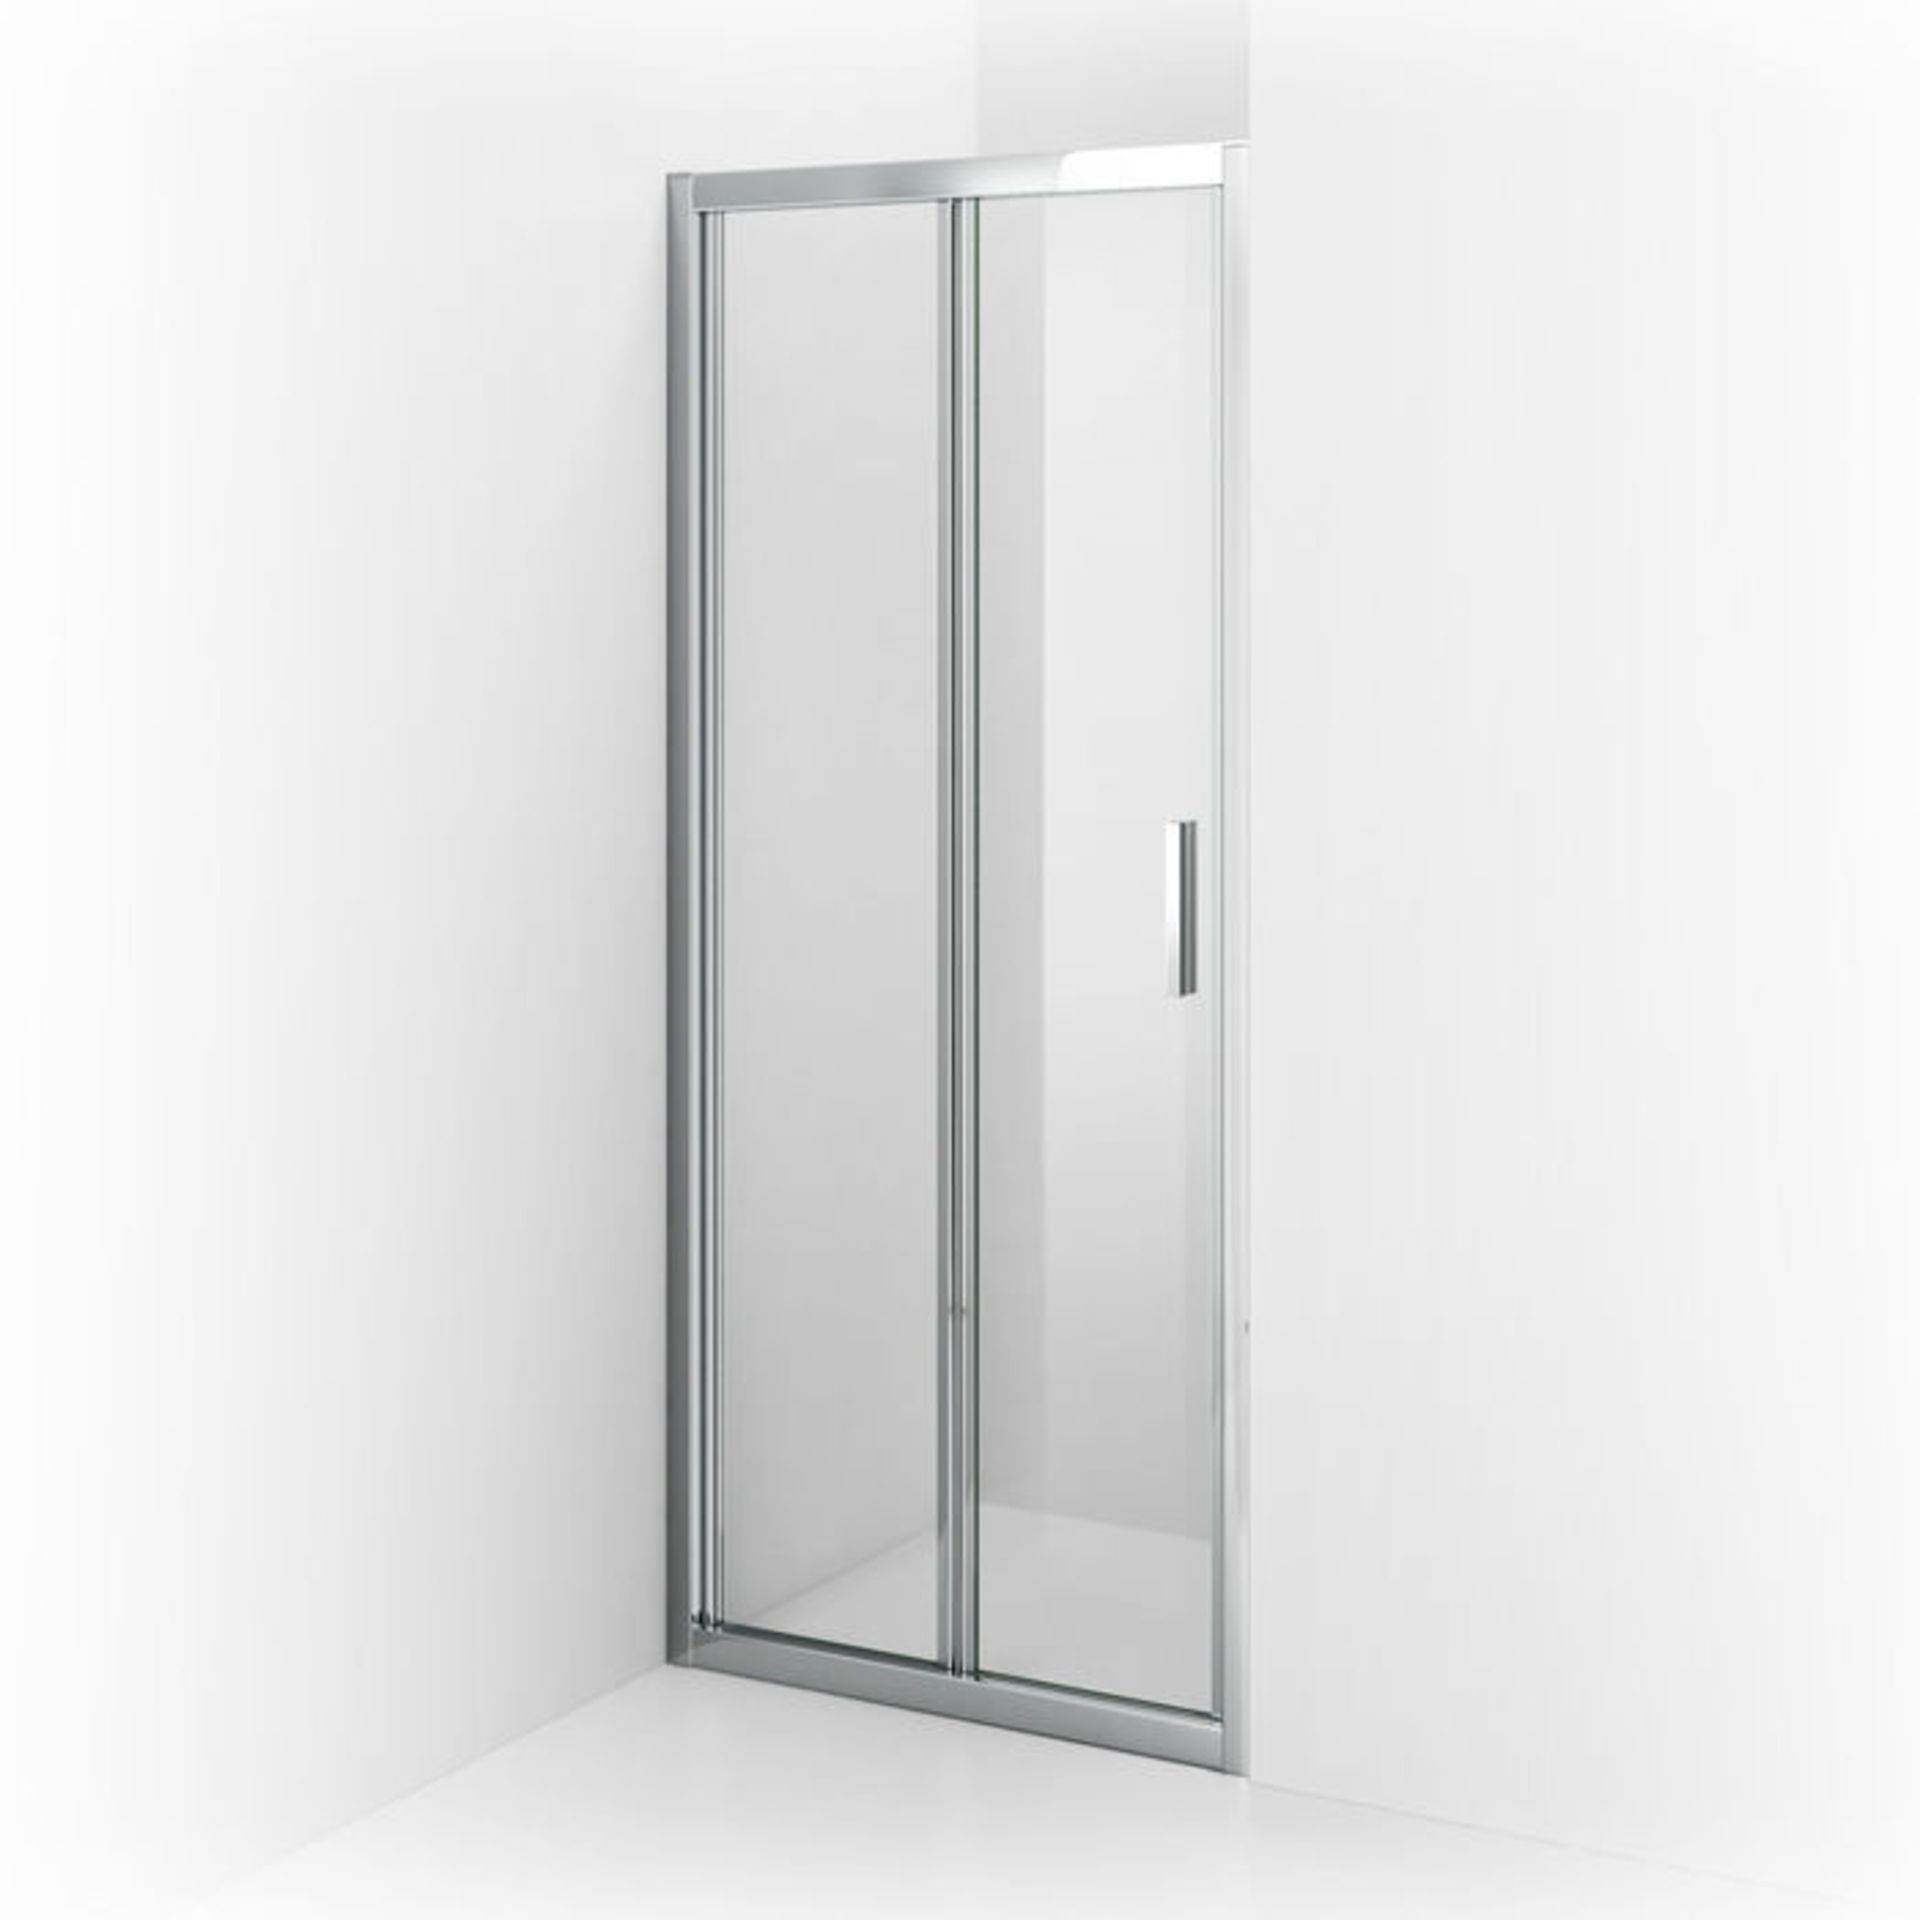 (W73) 800mm - 6mm - Elements EasyClean Bifold Shower Door. RRP £299.99. 6mm Safety Glass - Single- - Image 3 of 3